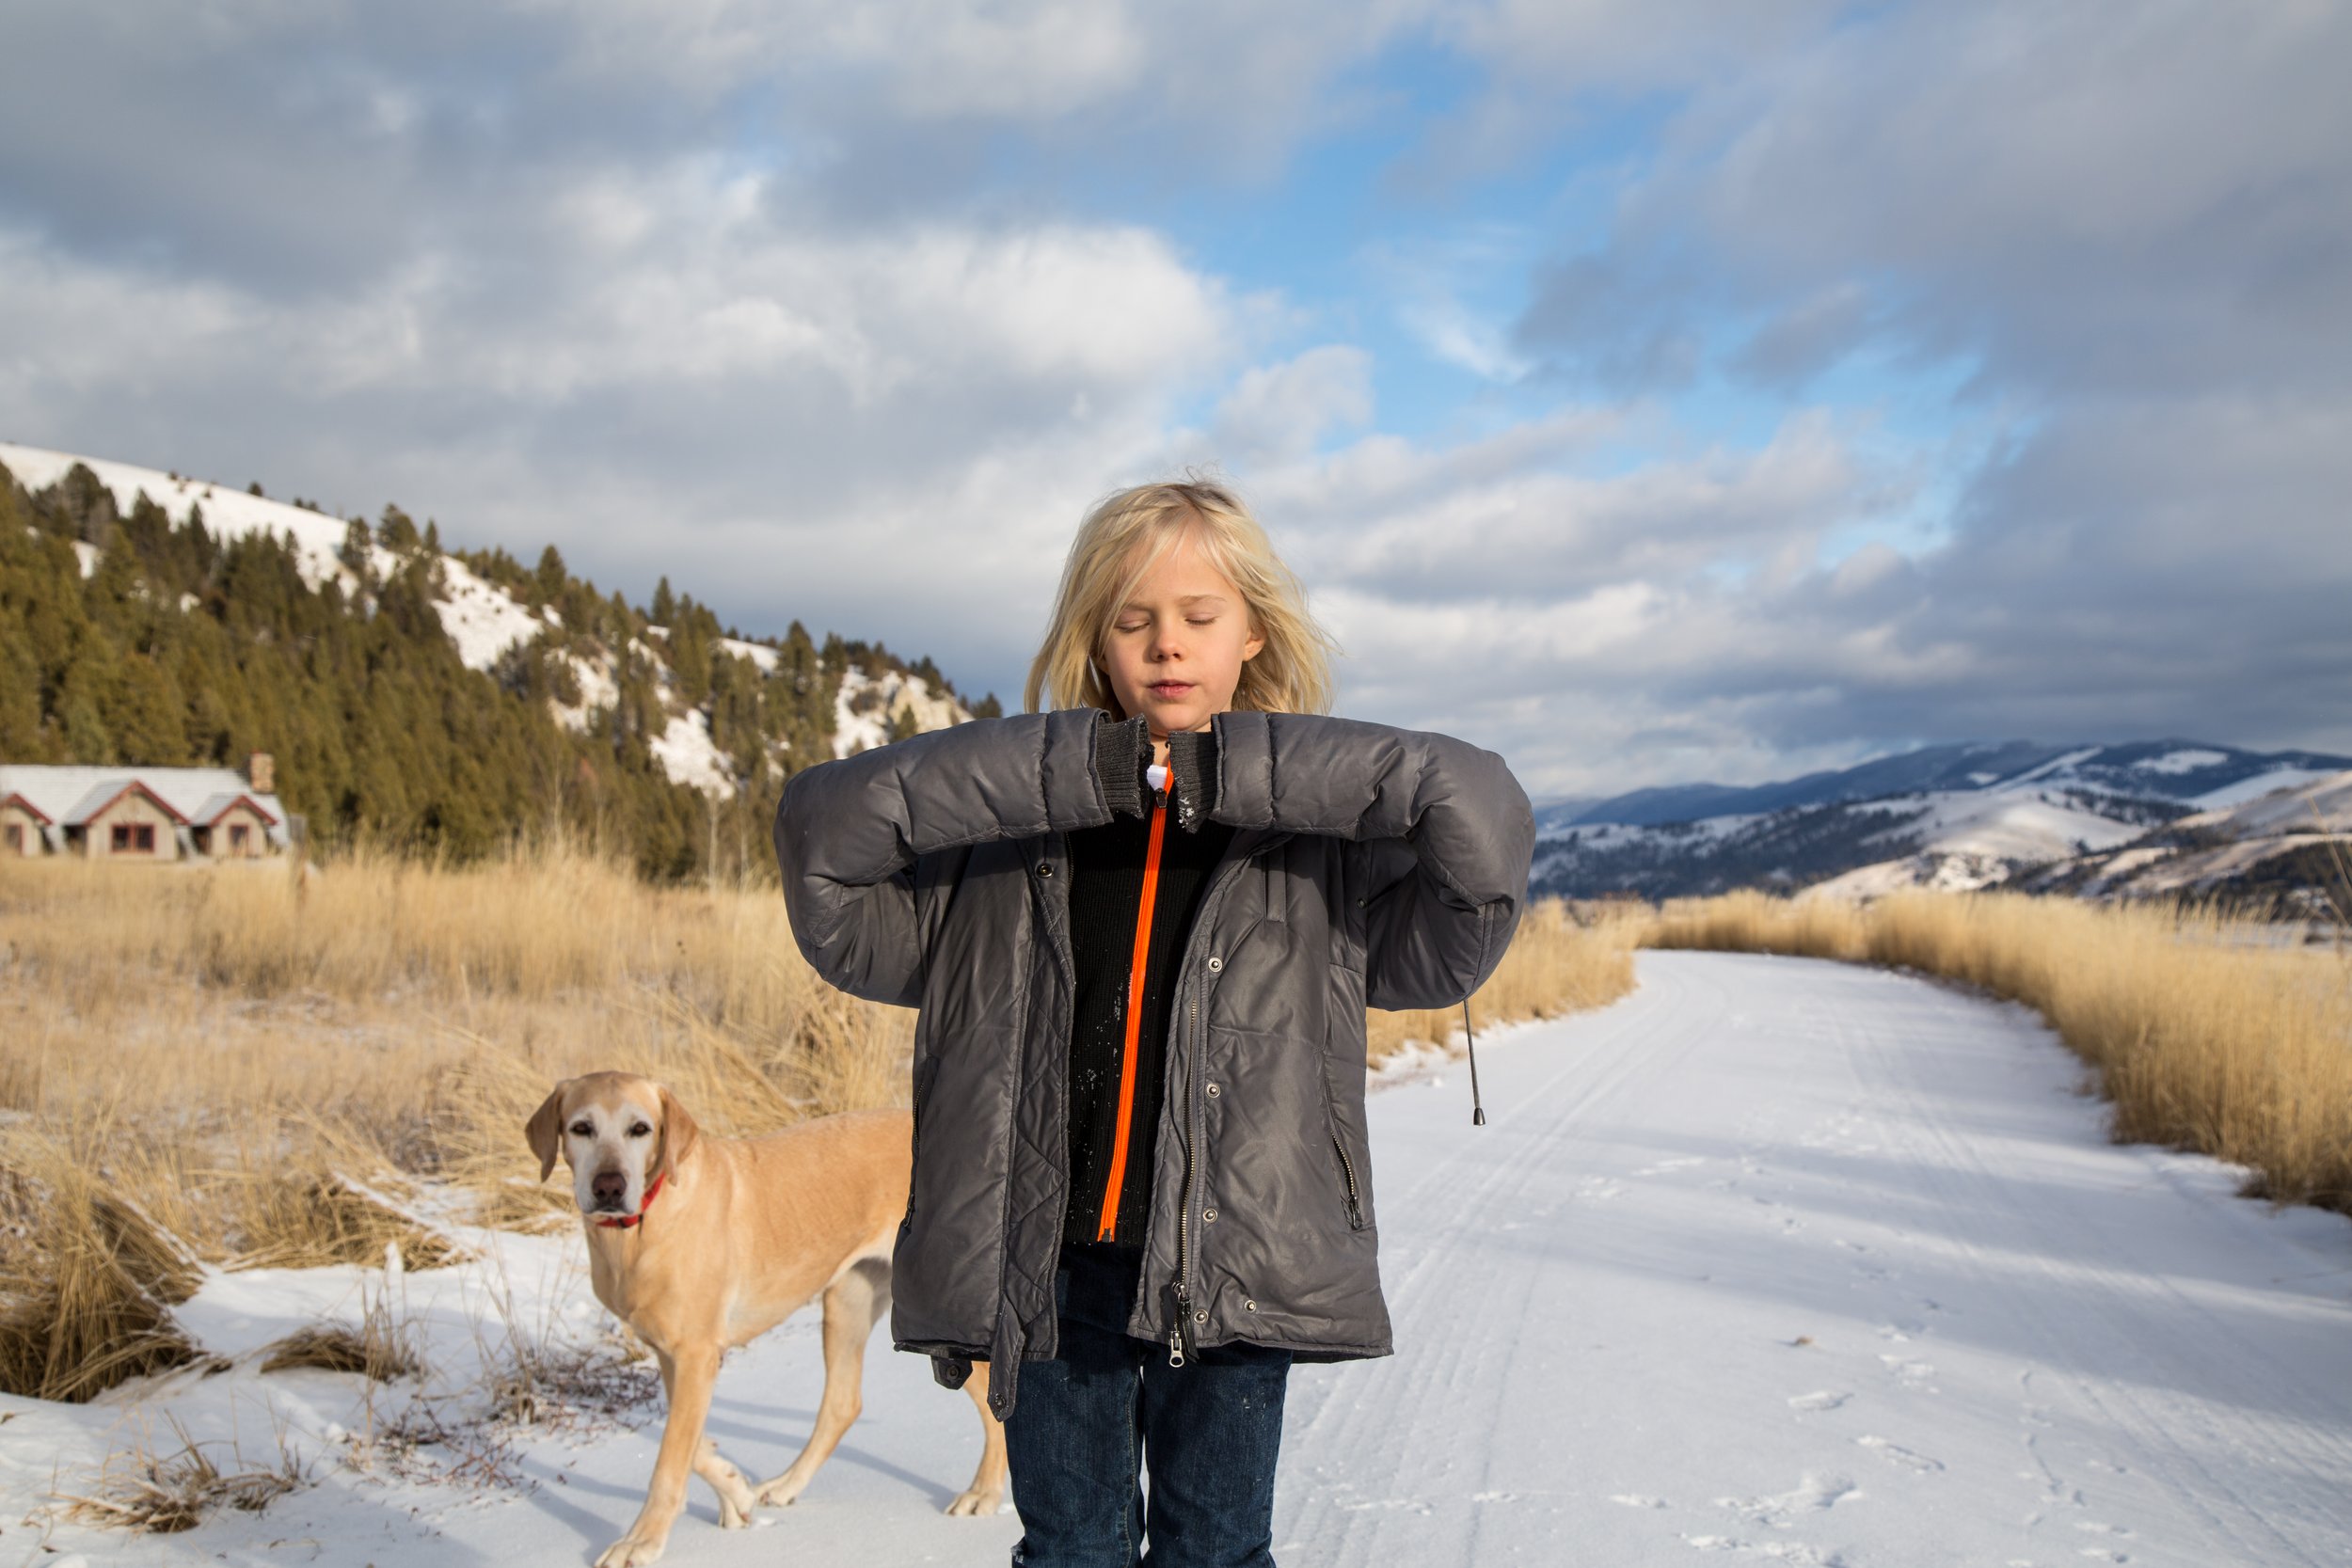   Montana, 2013 -  On a walk with our beloved dog, Frances. 